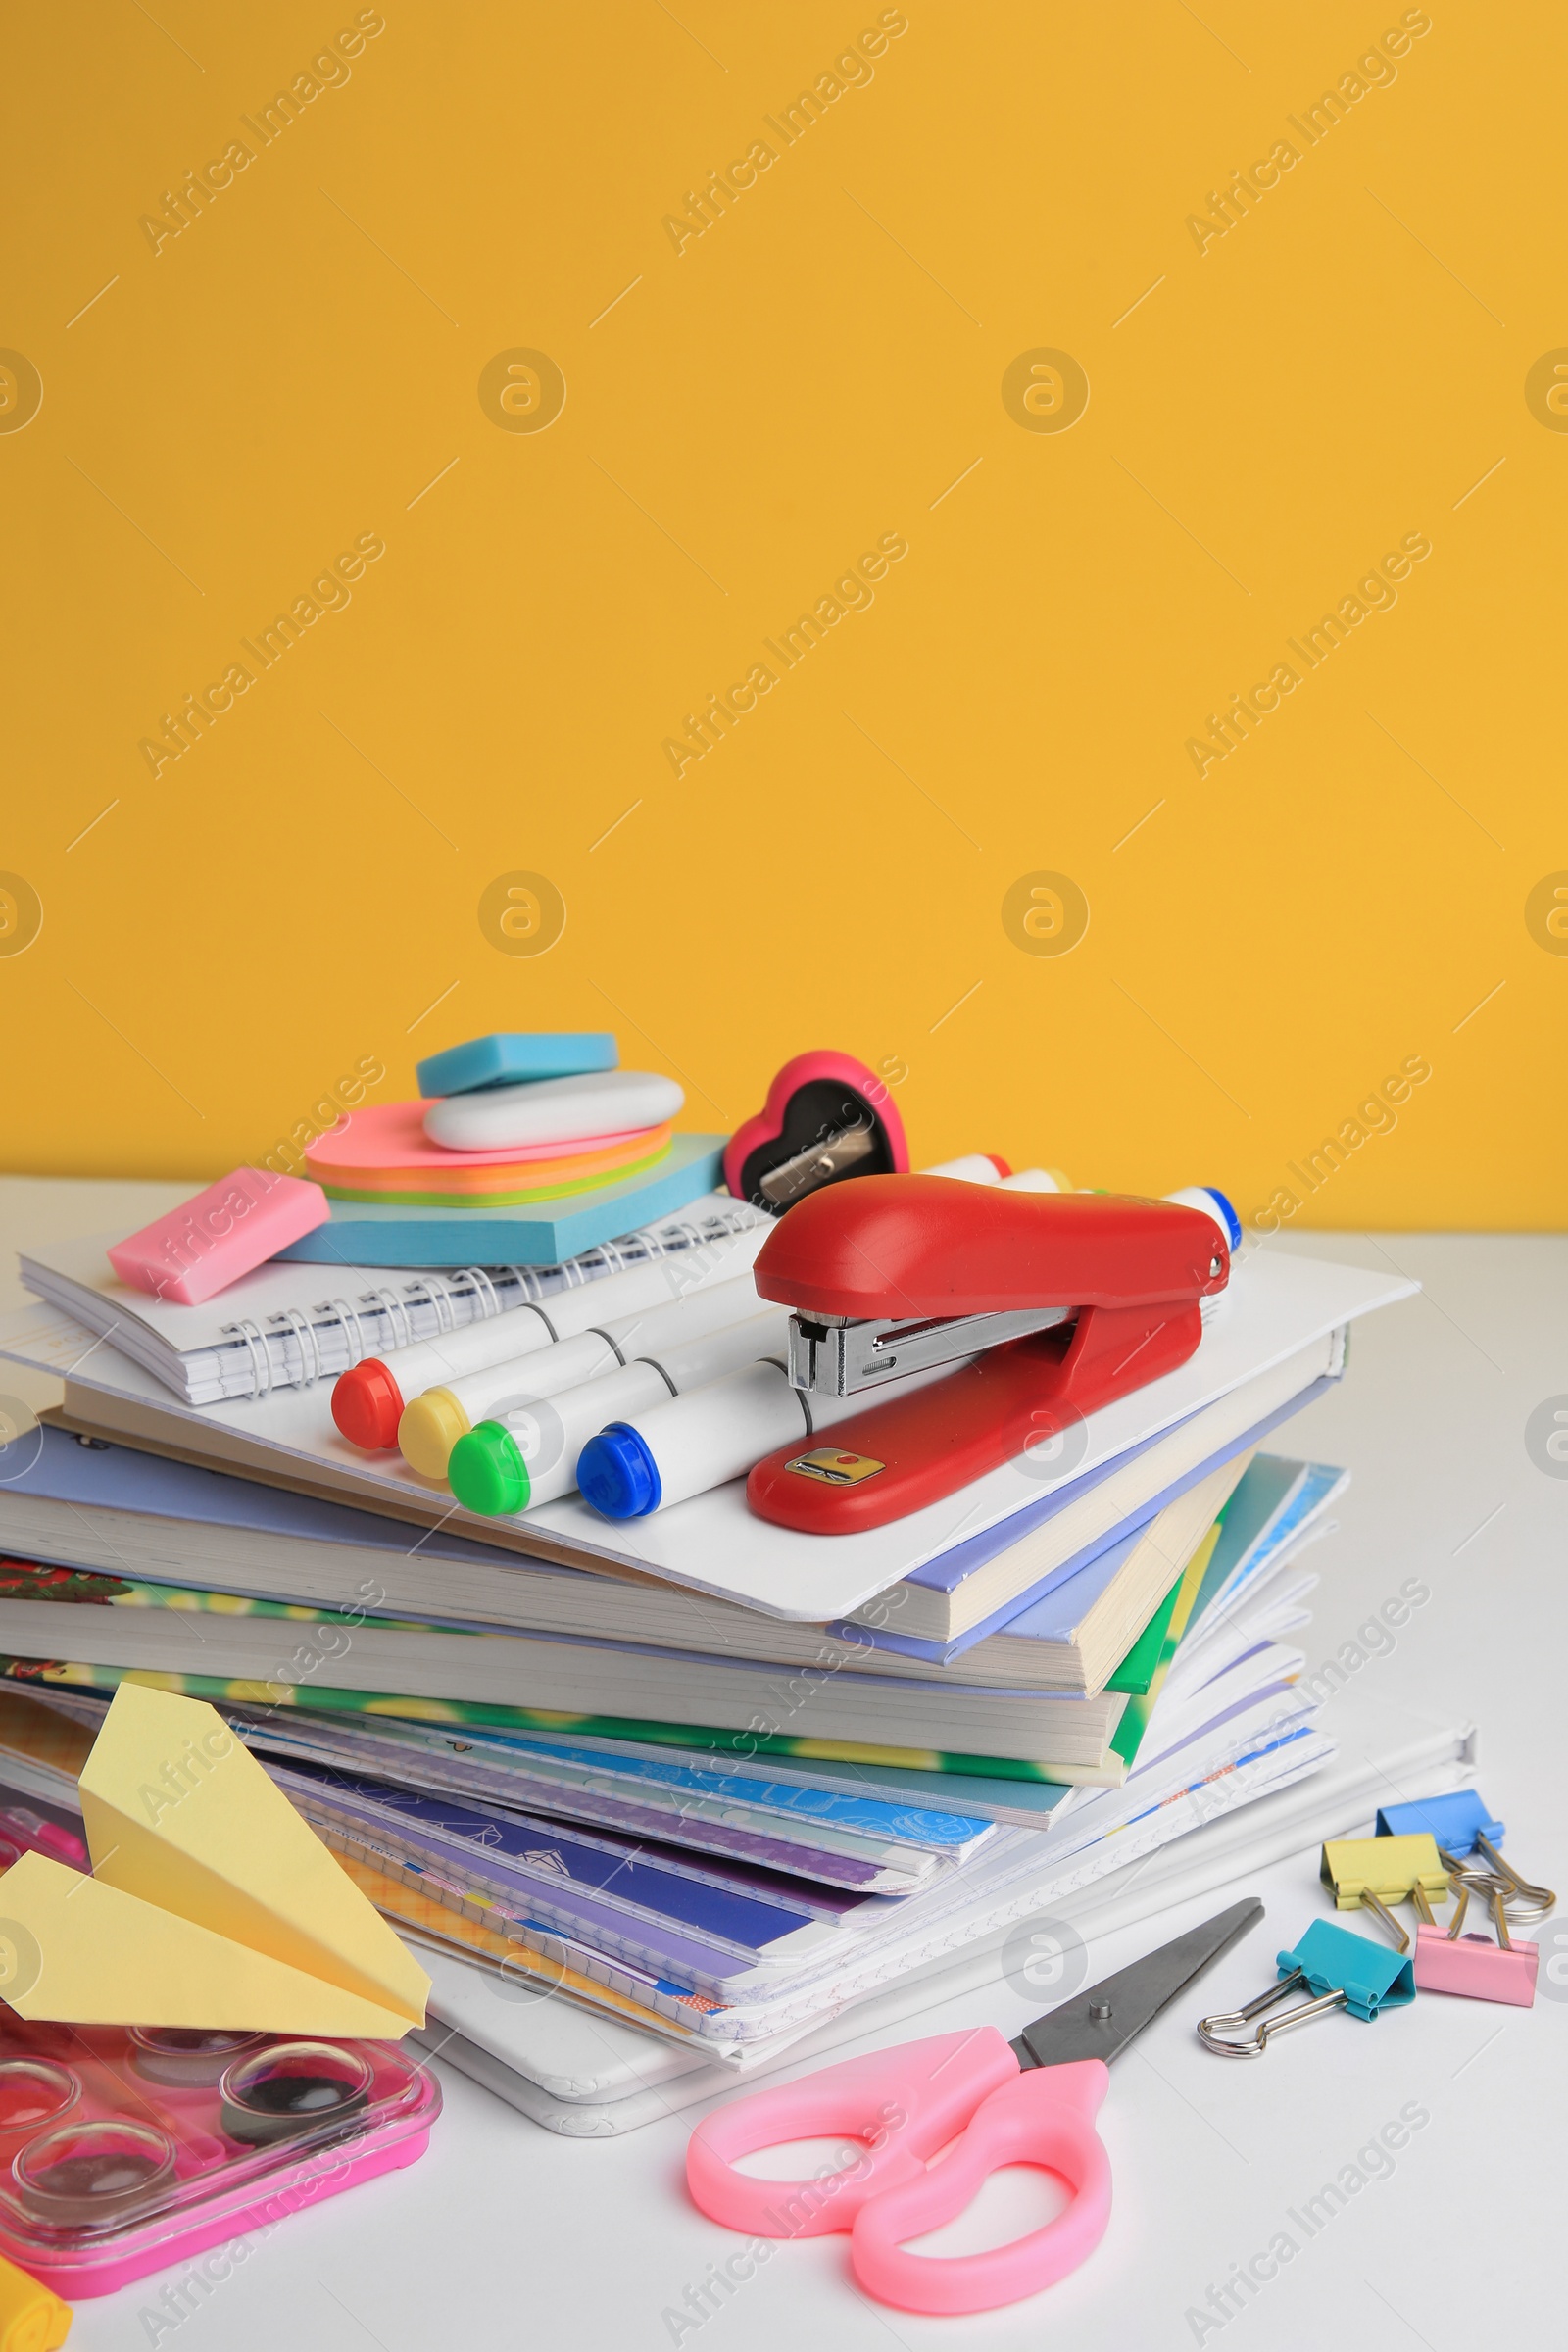 Photo of Many books, paper plane and different school stationery on white table against orange background. Back to school